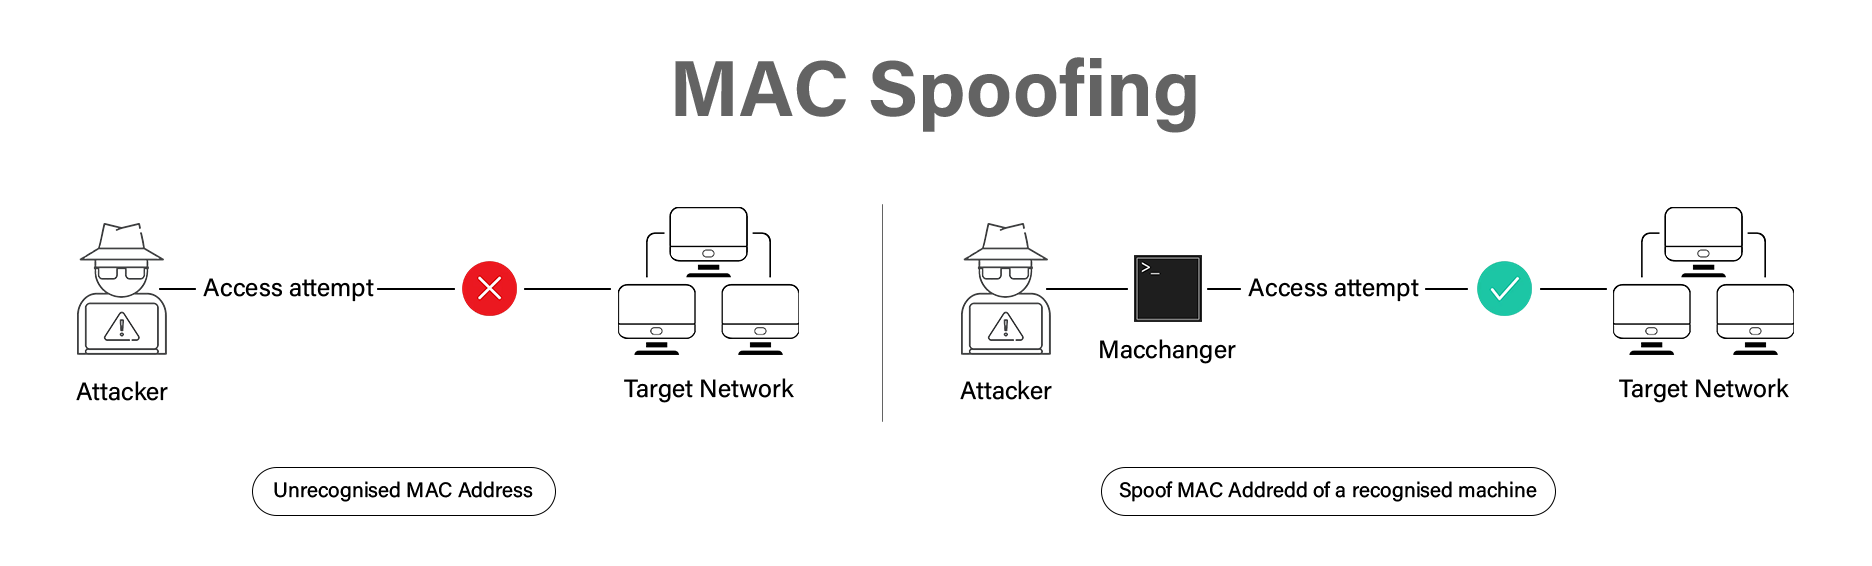 MAC Spoofing Attack Flow